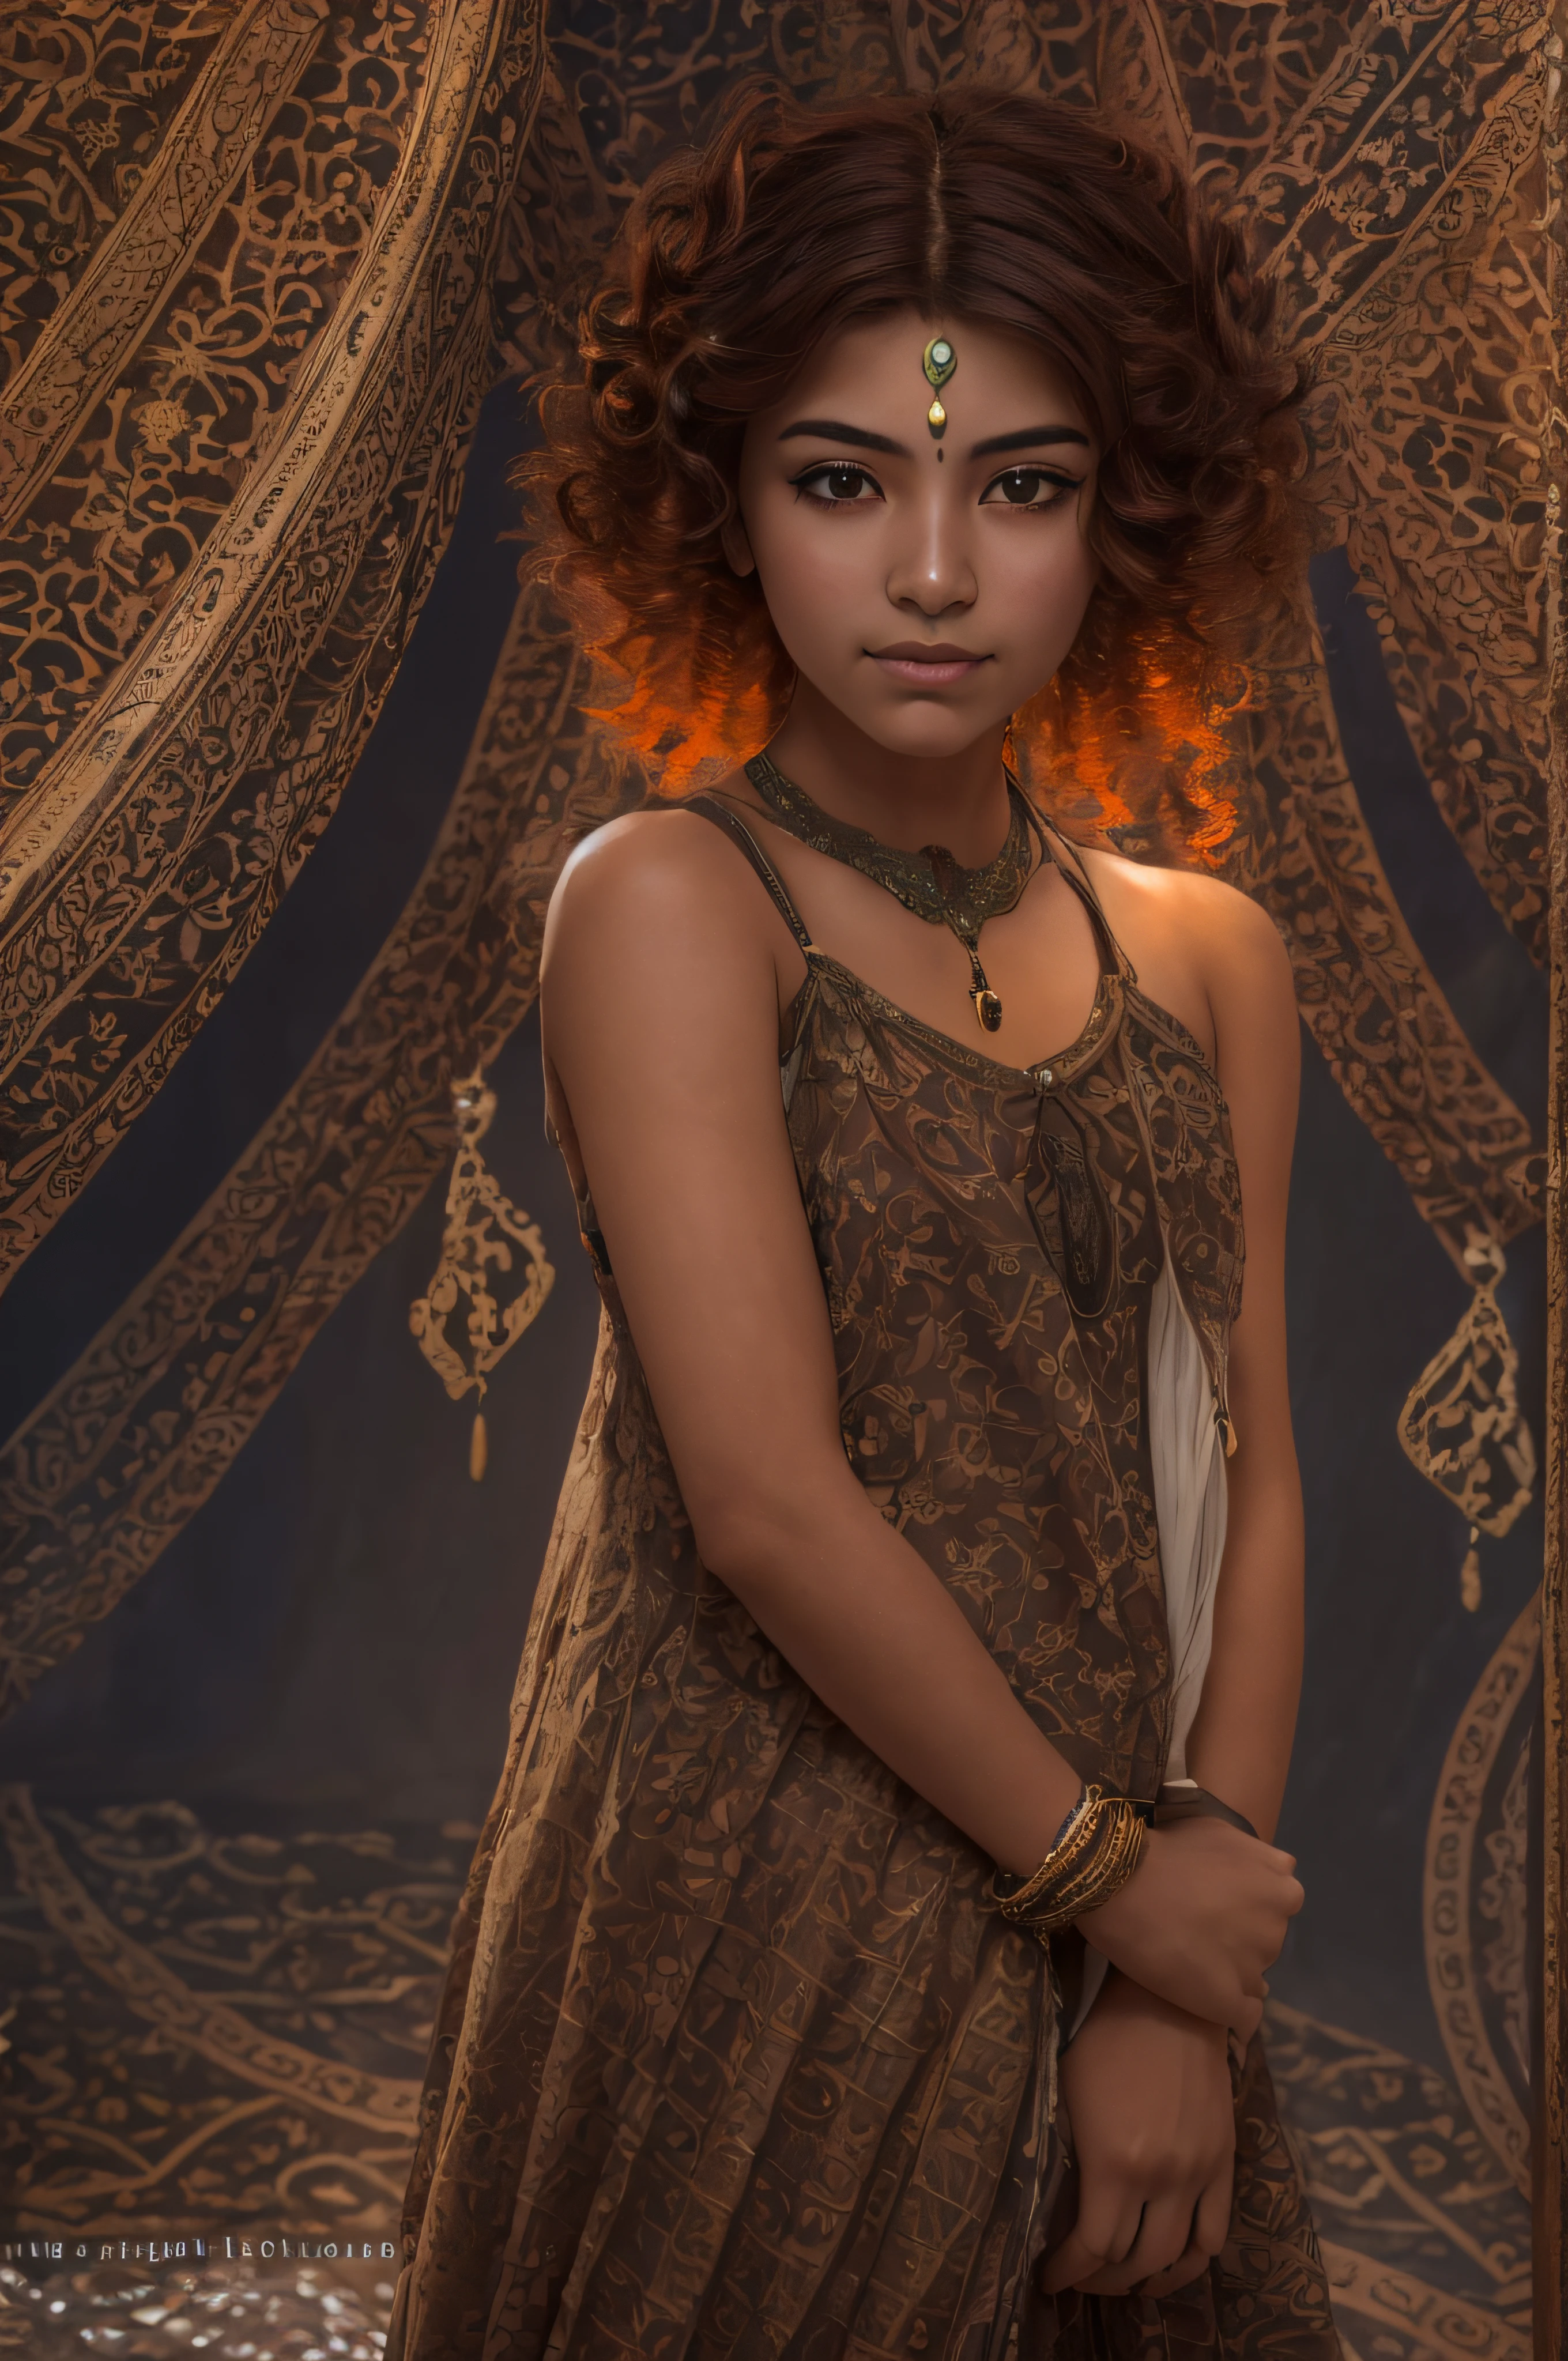 A full body of a 19-year-old Arabic woman with short red hair. Her dark brown eyes are fixed on the camera, conveying serenity and spiritual wisdom. where the soft light highlights her calm and mysterious aura. She has dark skin, which seems to exude a natural glow. Her hair is short, with a cut that highlights her confident and spiritual expression. The strands are the color of ebony, with some natural highlights that shine softly in the light. Her eyebrows are well defined and complement her expressive eyes. They seem capable of seeing beyond appearances and delving into the depths of the human spirit. Her face is serene, with soft features that suggest compassion and empathy. She has a big gentle smile that radiates calmness and confidence. Her presence is welcoming and inspiring.